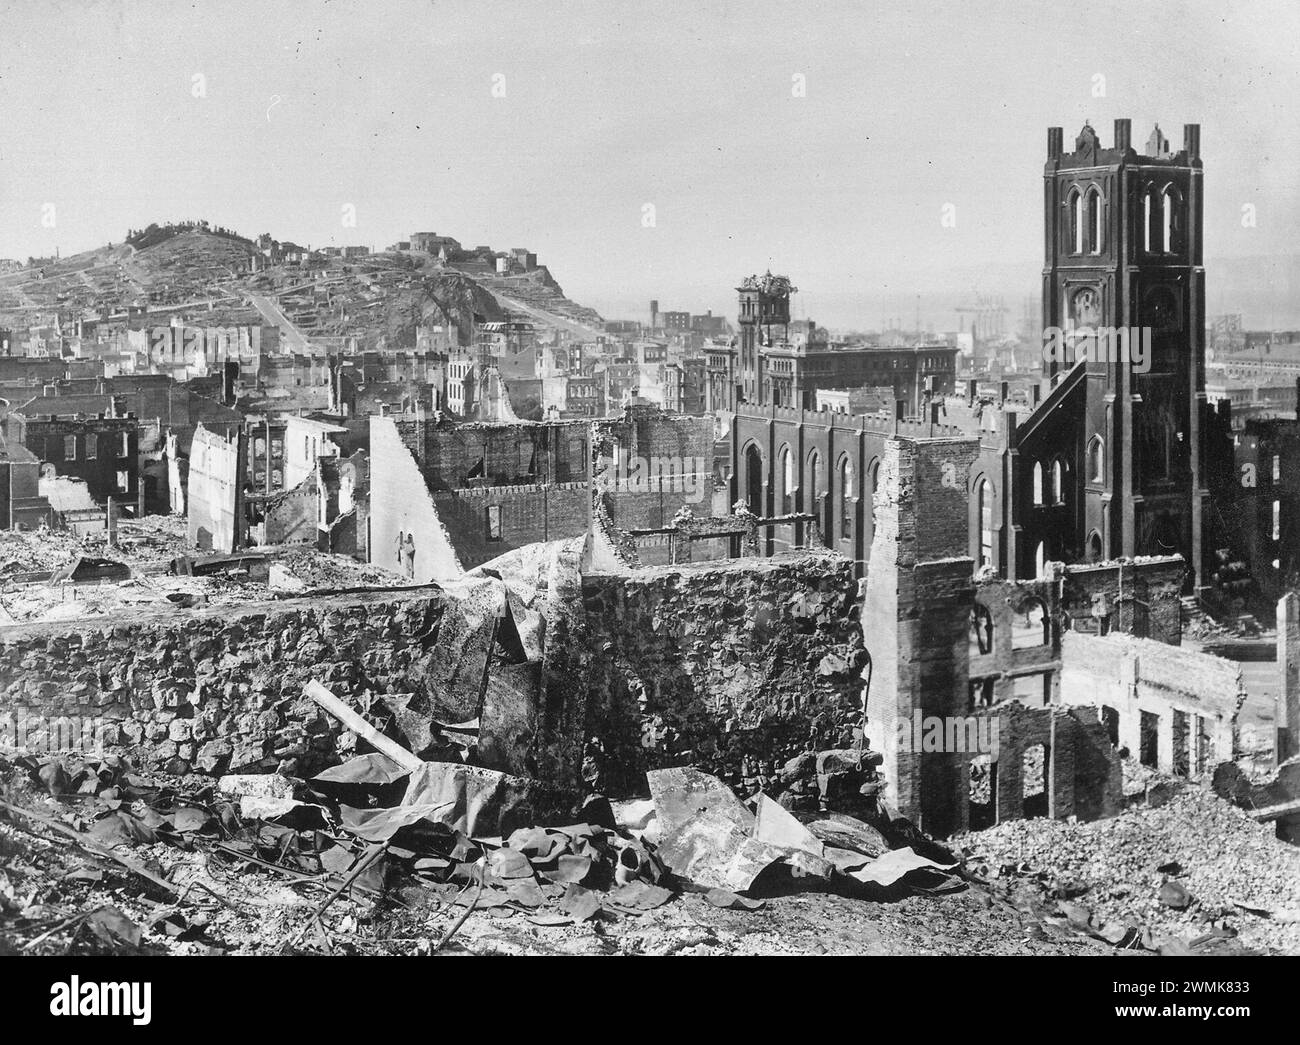 San Francisco Earthquake of 1906: Area north of California street in the vicinity of Grant Avenue showing Telegraph Hill in the distance. The church standing on the right is Saint Mary's Church, entrance to Chinatown. The area adjacent to Saint Mary's Church,showing a crumpled tower or steeple is the Hall of Justice on Kearny and Clay Streets Stock Photo